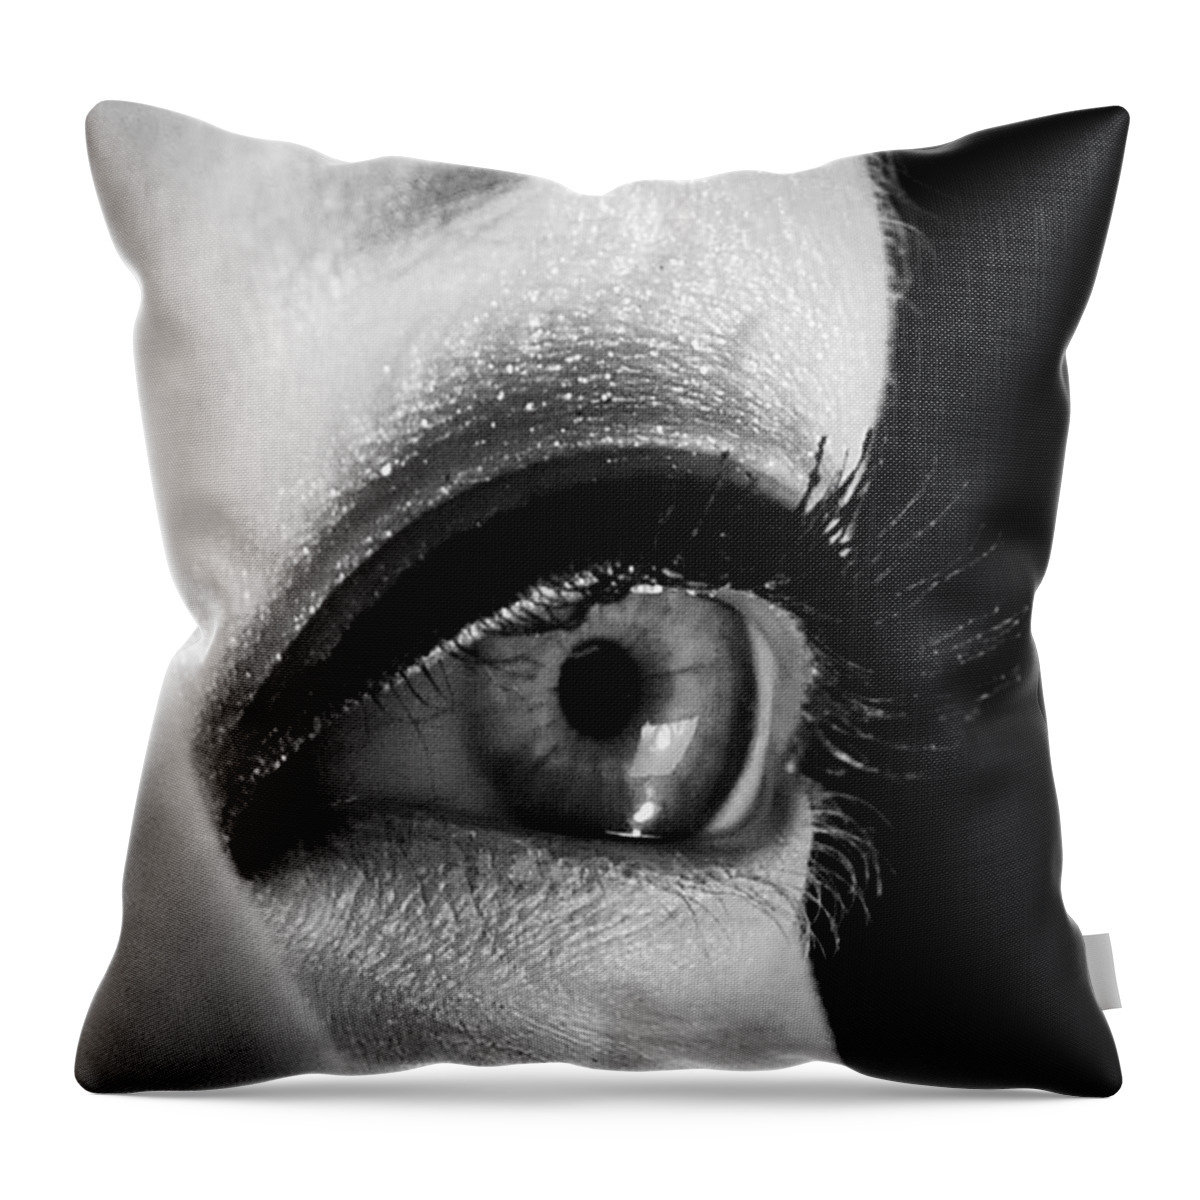 Artistic Photographs Throw Pillow featuring the photograph Looking glass by Robert WK Clark